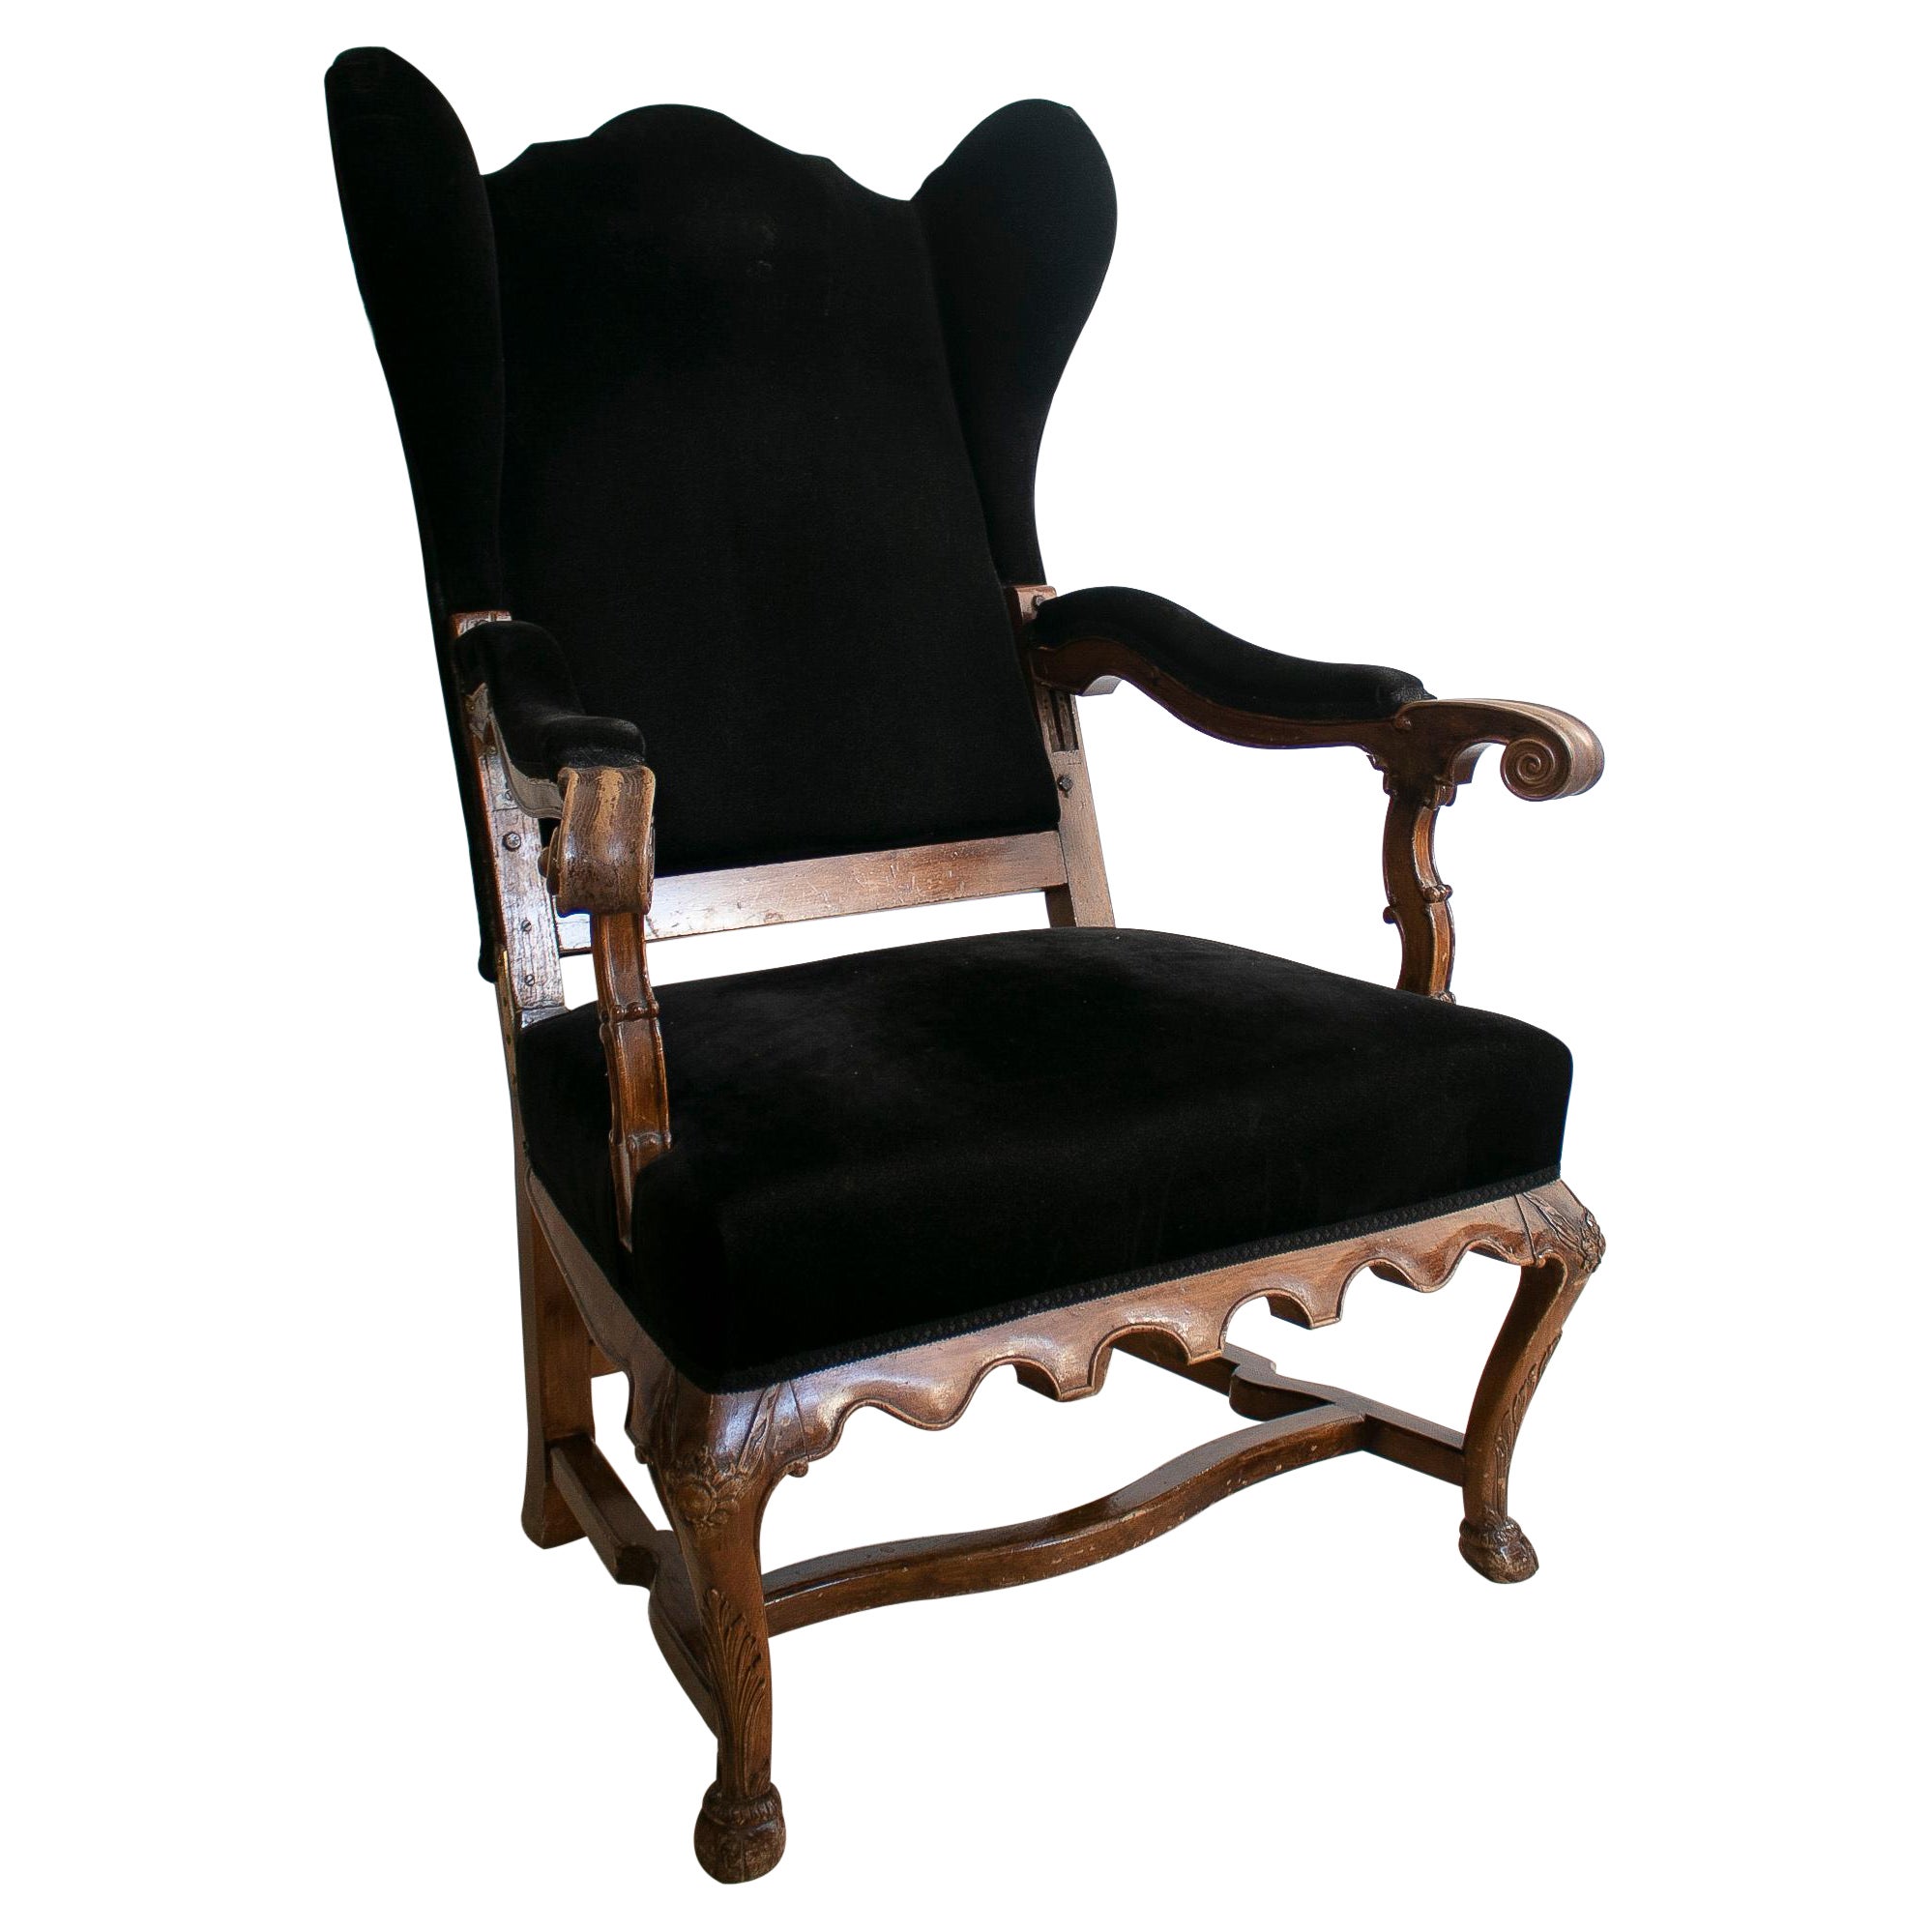 19th Century English Wooden Winged Armchair w/ Velvet Upholstery